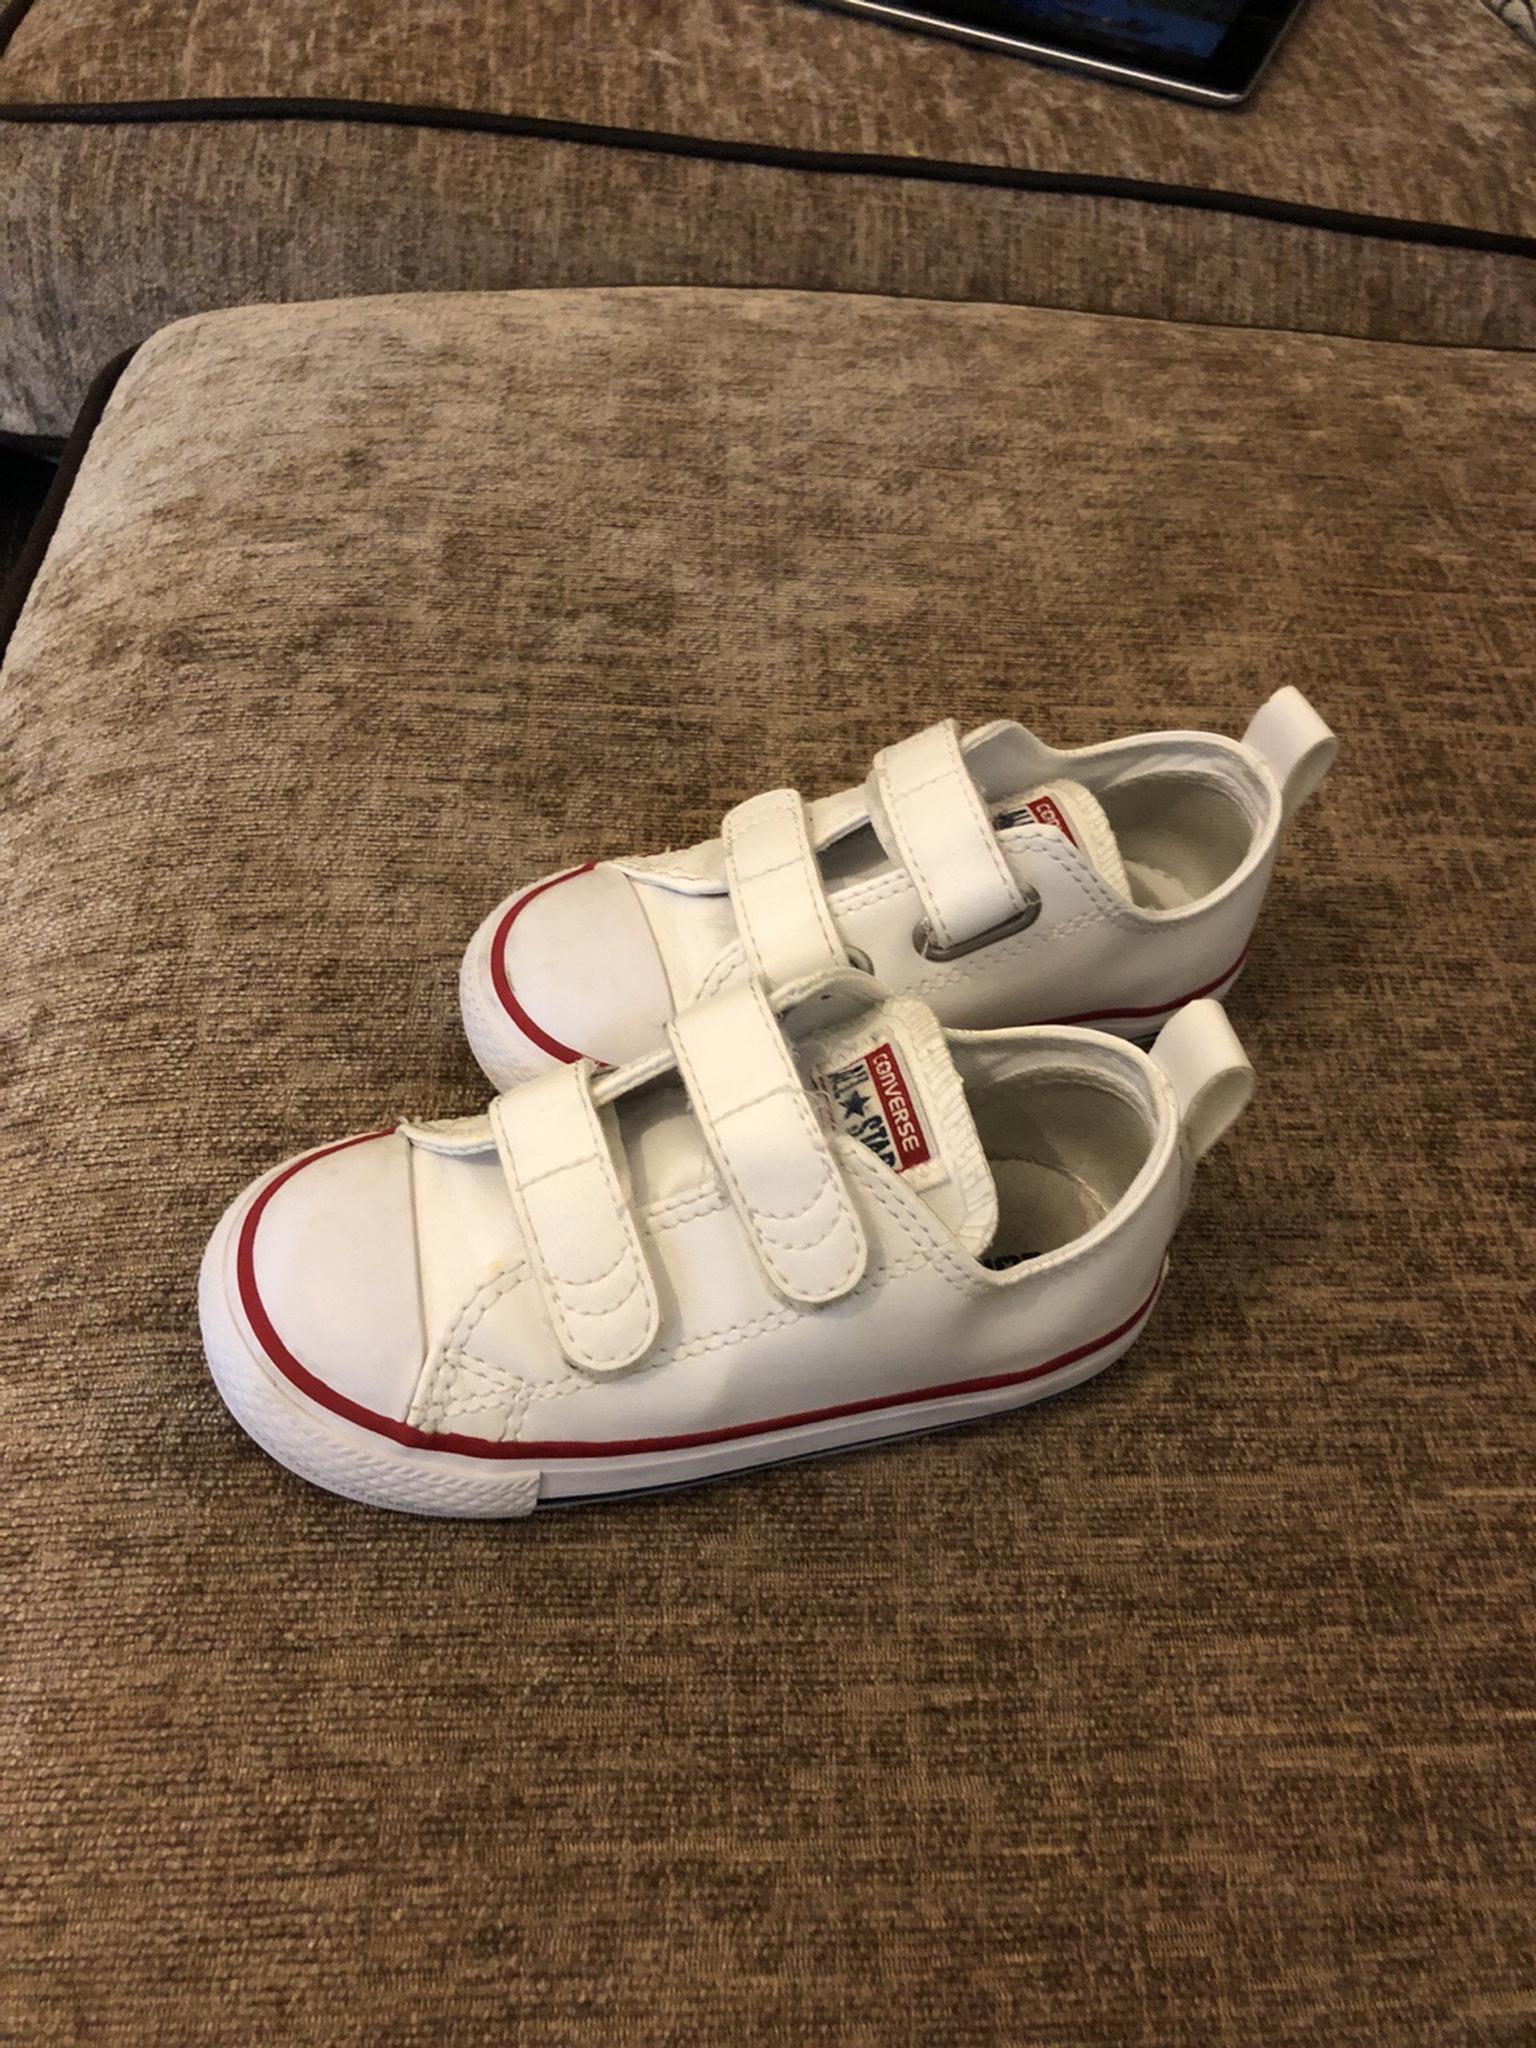 baby converse size 8